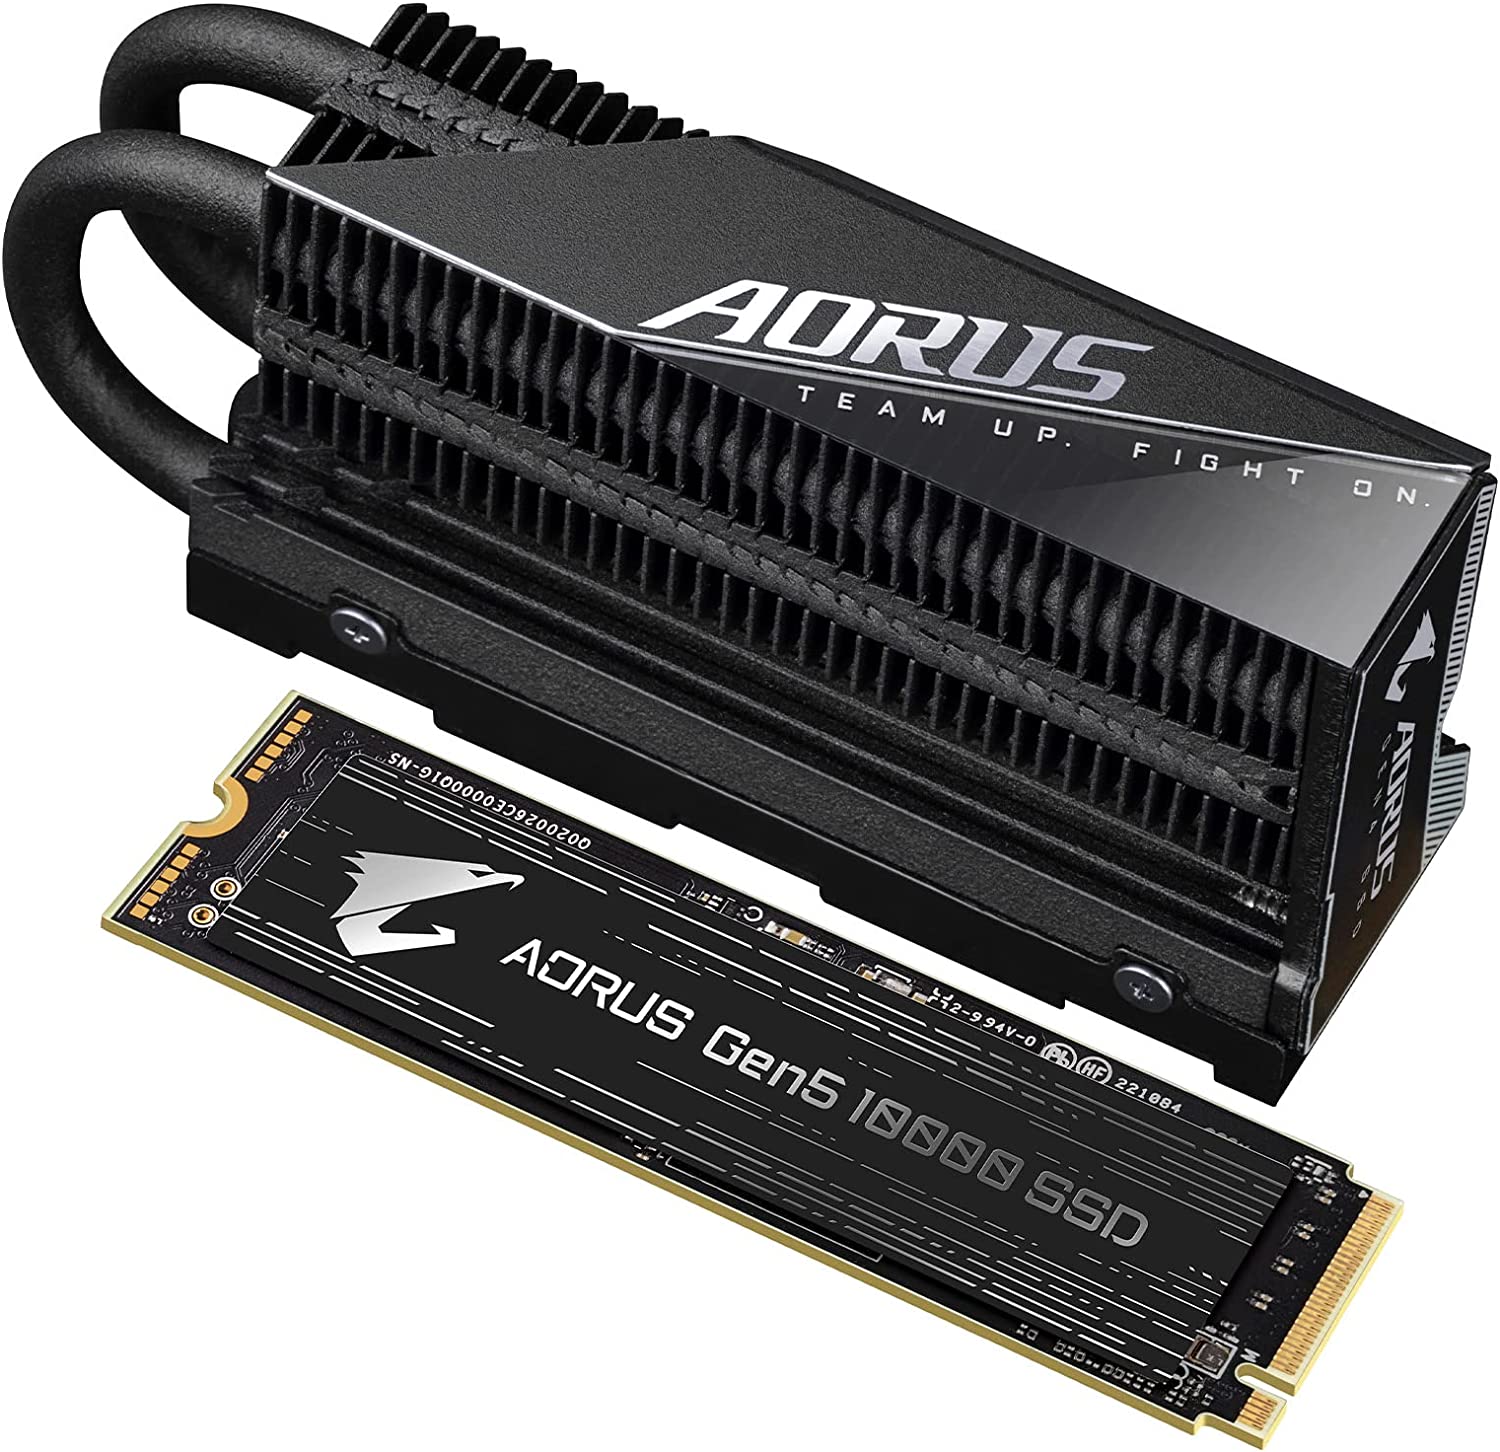 The Gigabyte Aorus Gen5 10000 doesn't have a fan, but it <em>does</em> have a giant heatsink that might not fit in all PC builds;